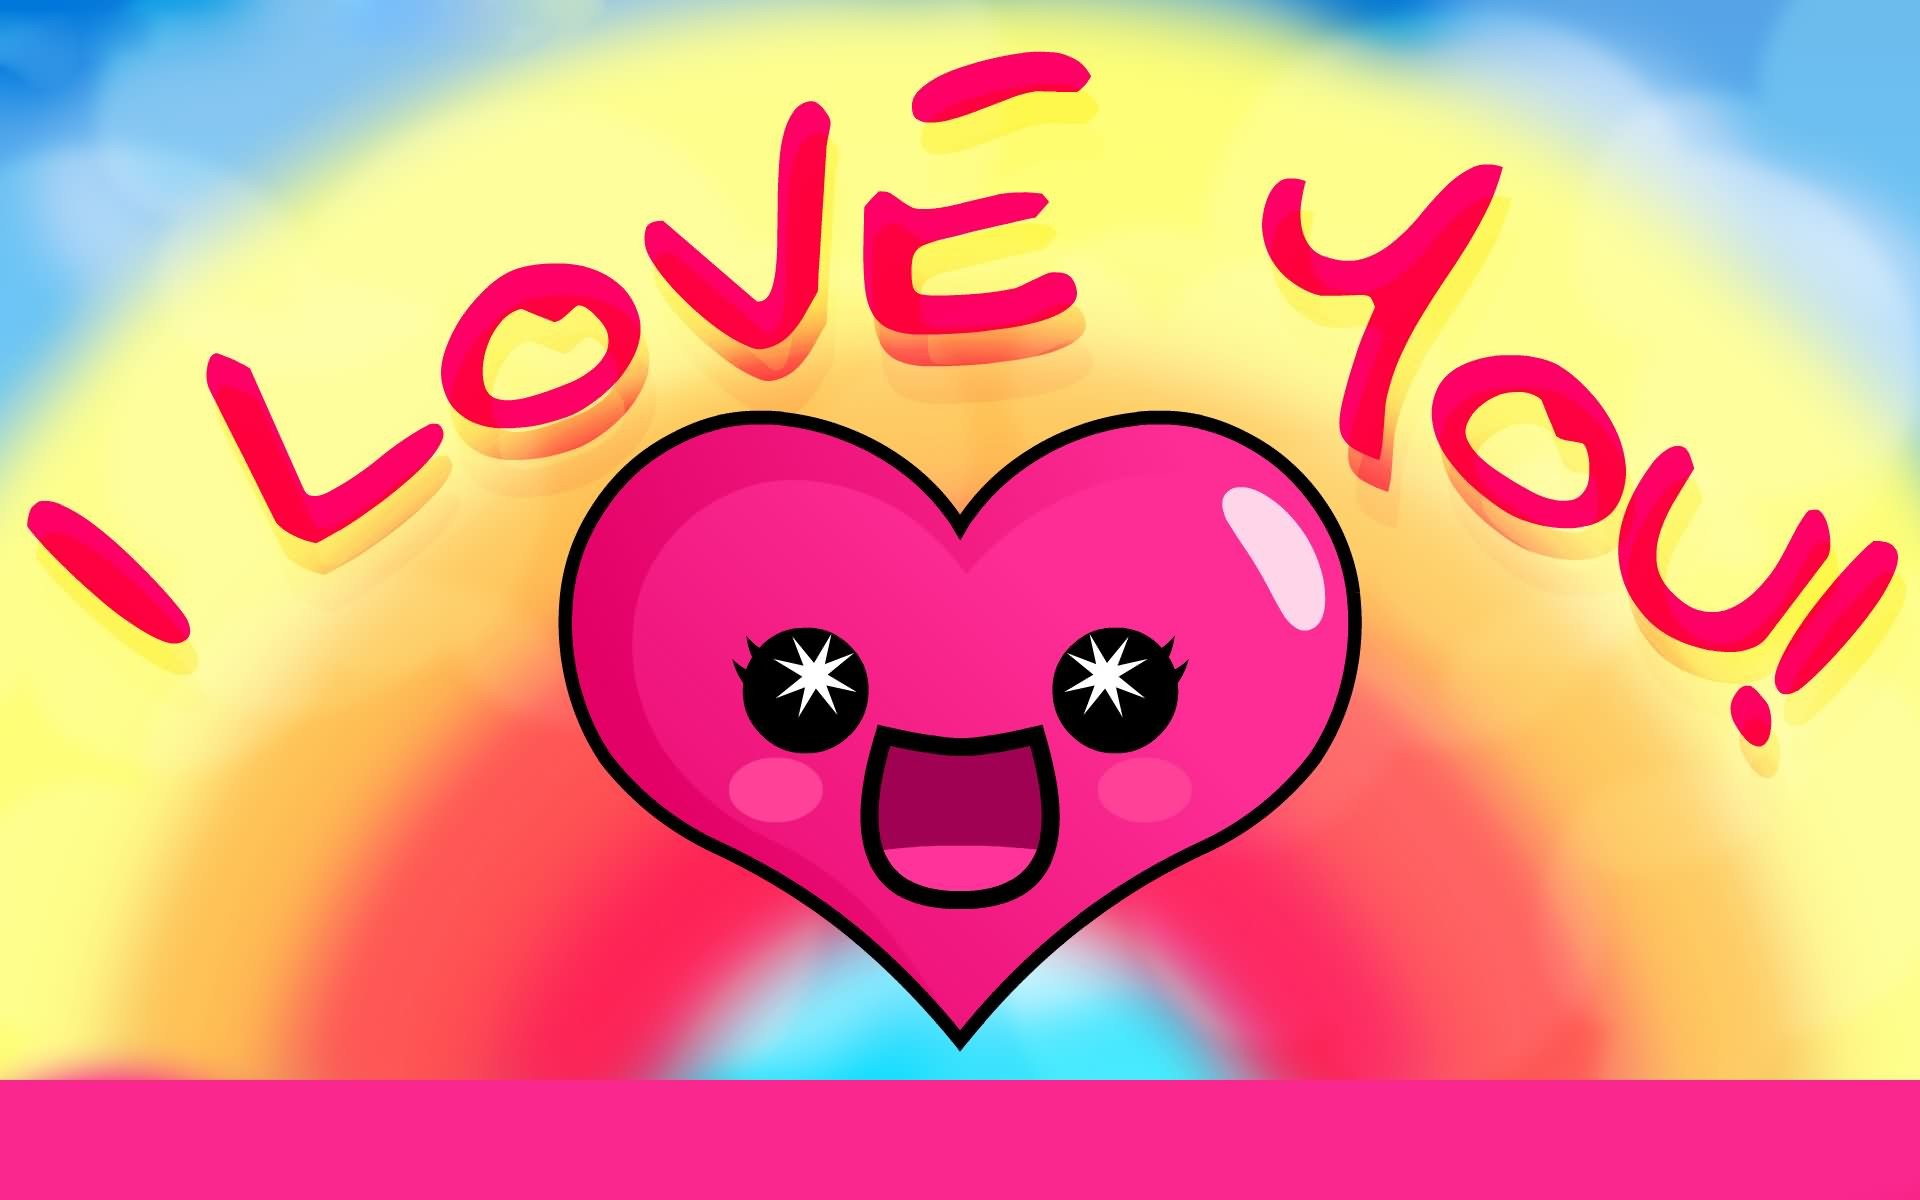 Best Moment for Simple Animated Glitter Images I Love You and i love you animated heart